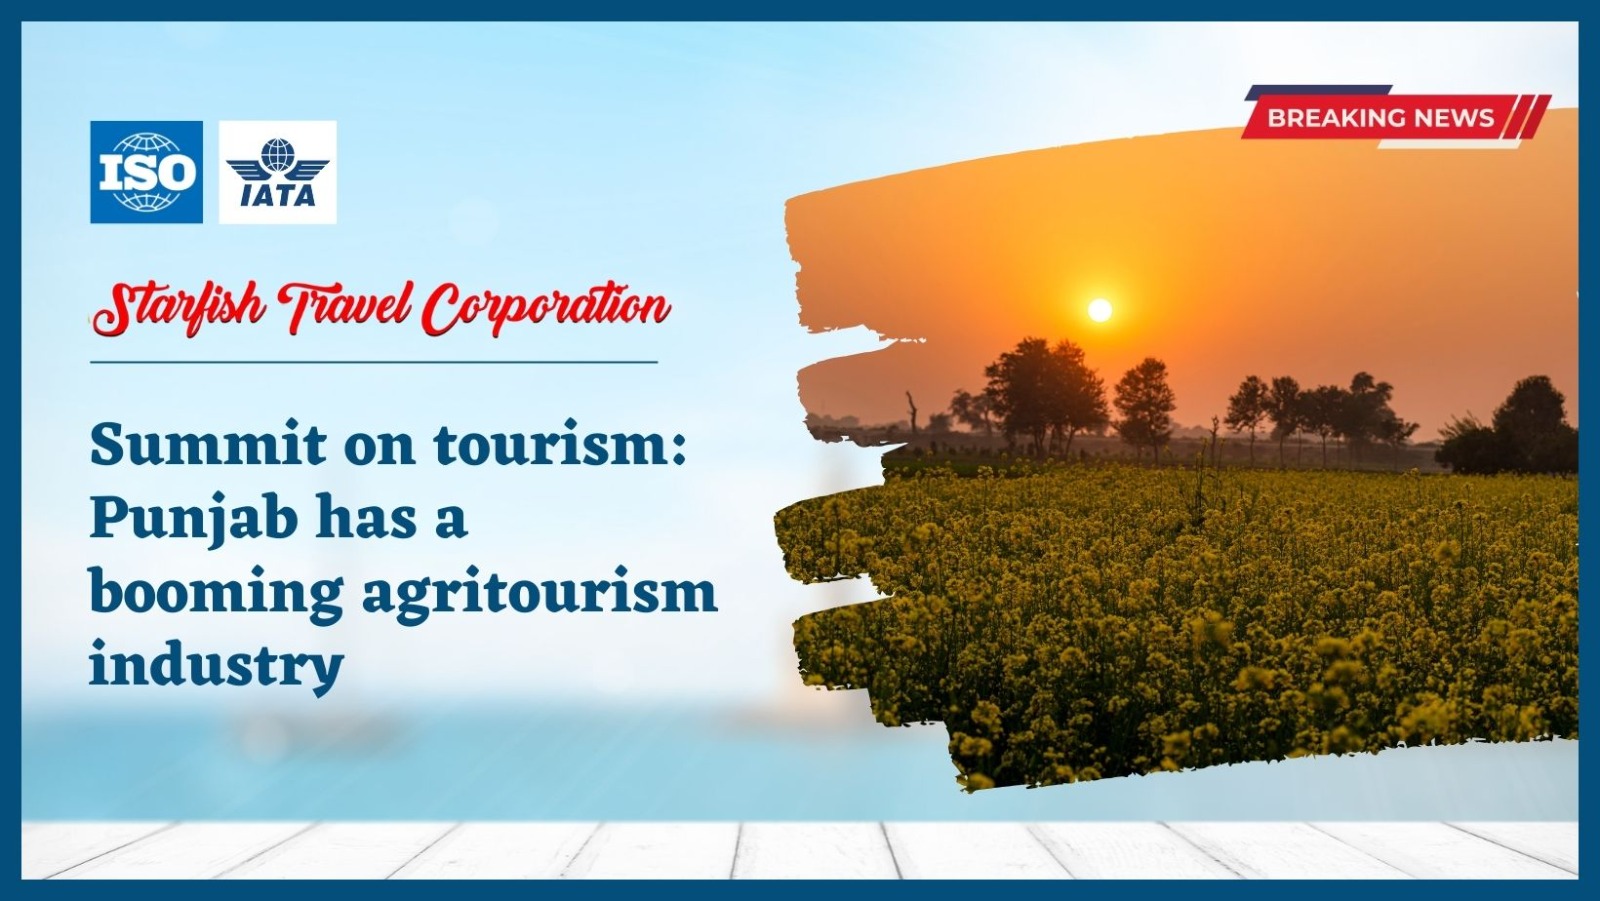 Summit on tourism: Punjab has a booming agritourism industry